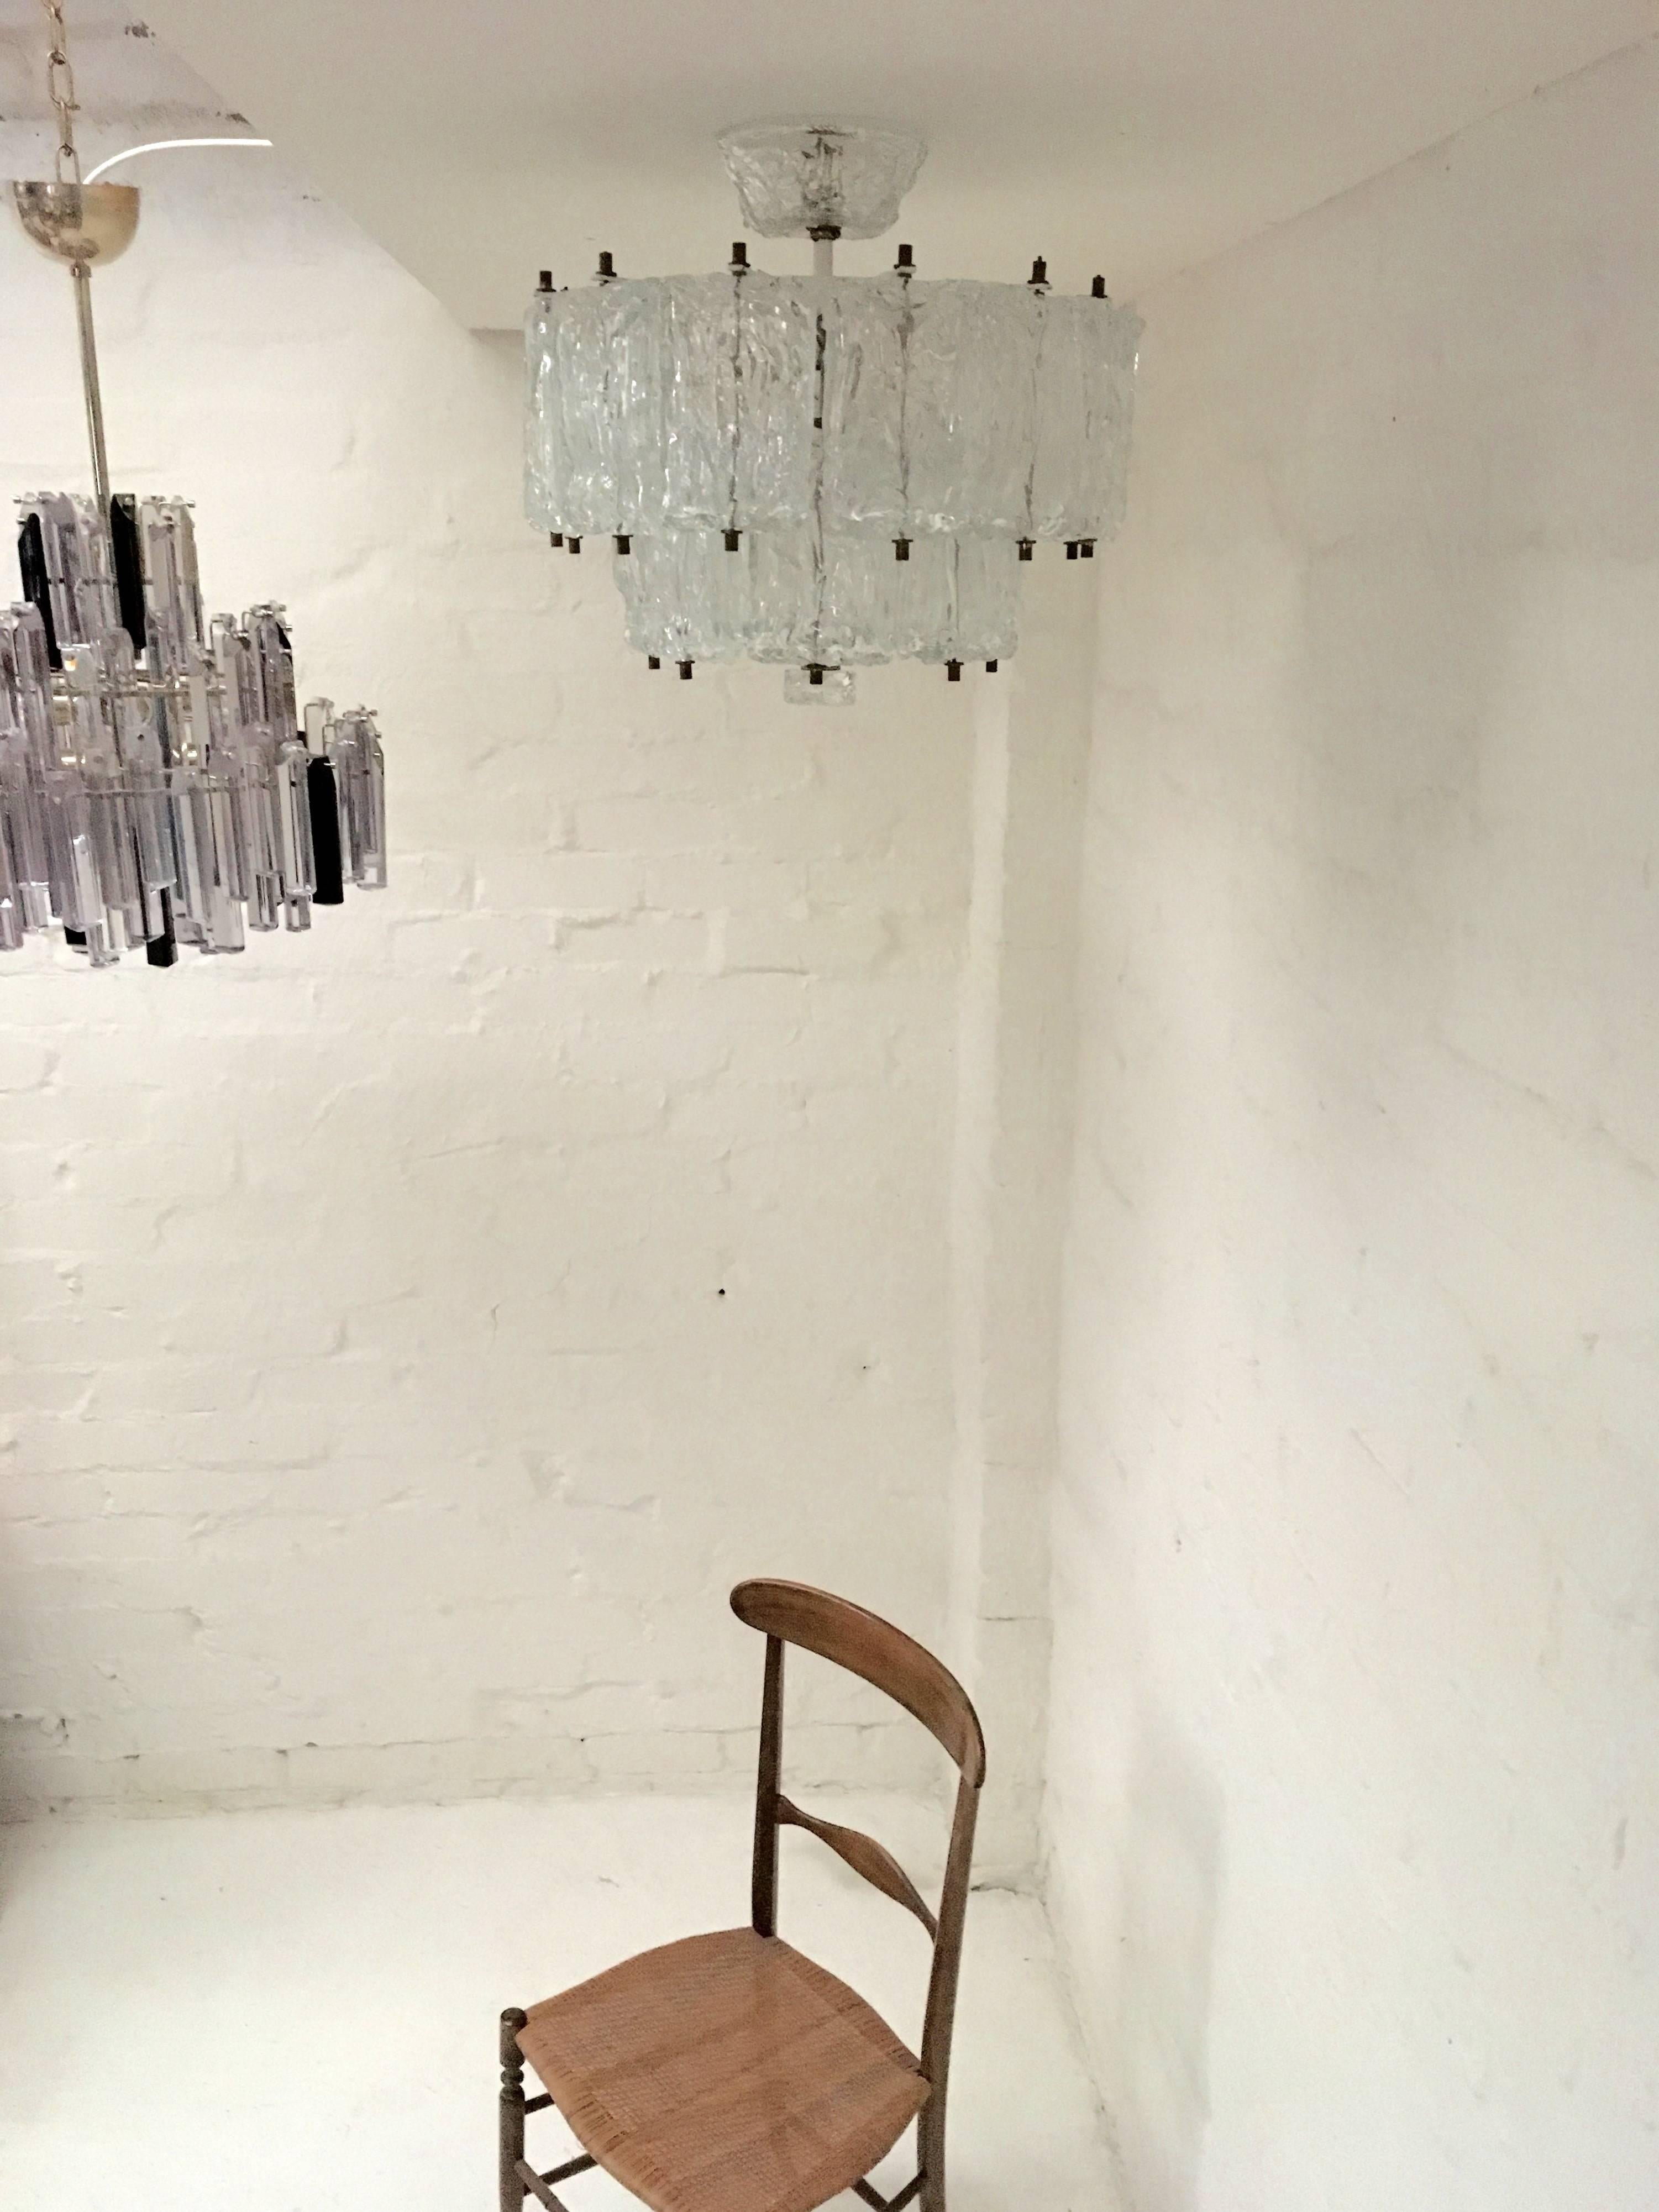 Perfect for smaller apartments and lower ceilings, this chandelier is designed to completely hide the light bulbs and to cling quite closely to the ceiling, with a relatively short drop of 40 cm.

The bricks or tiles that form this lovely